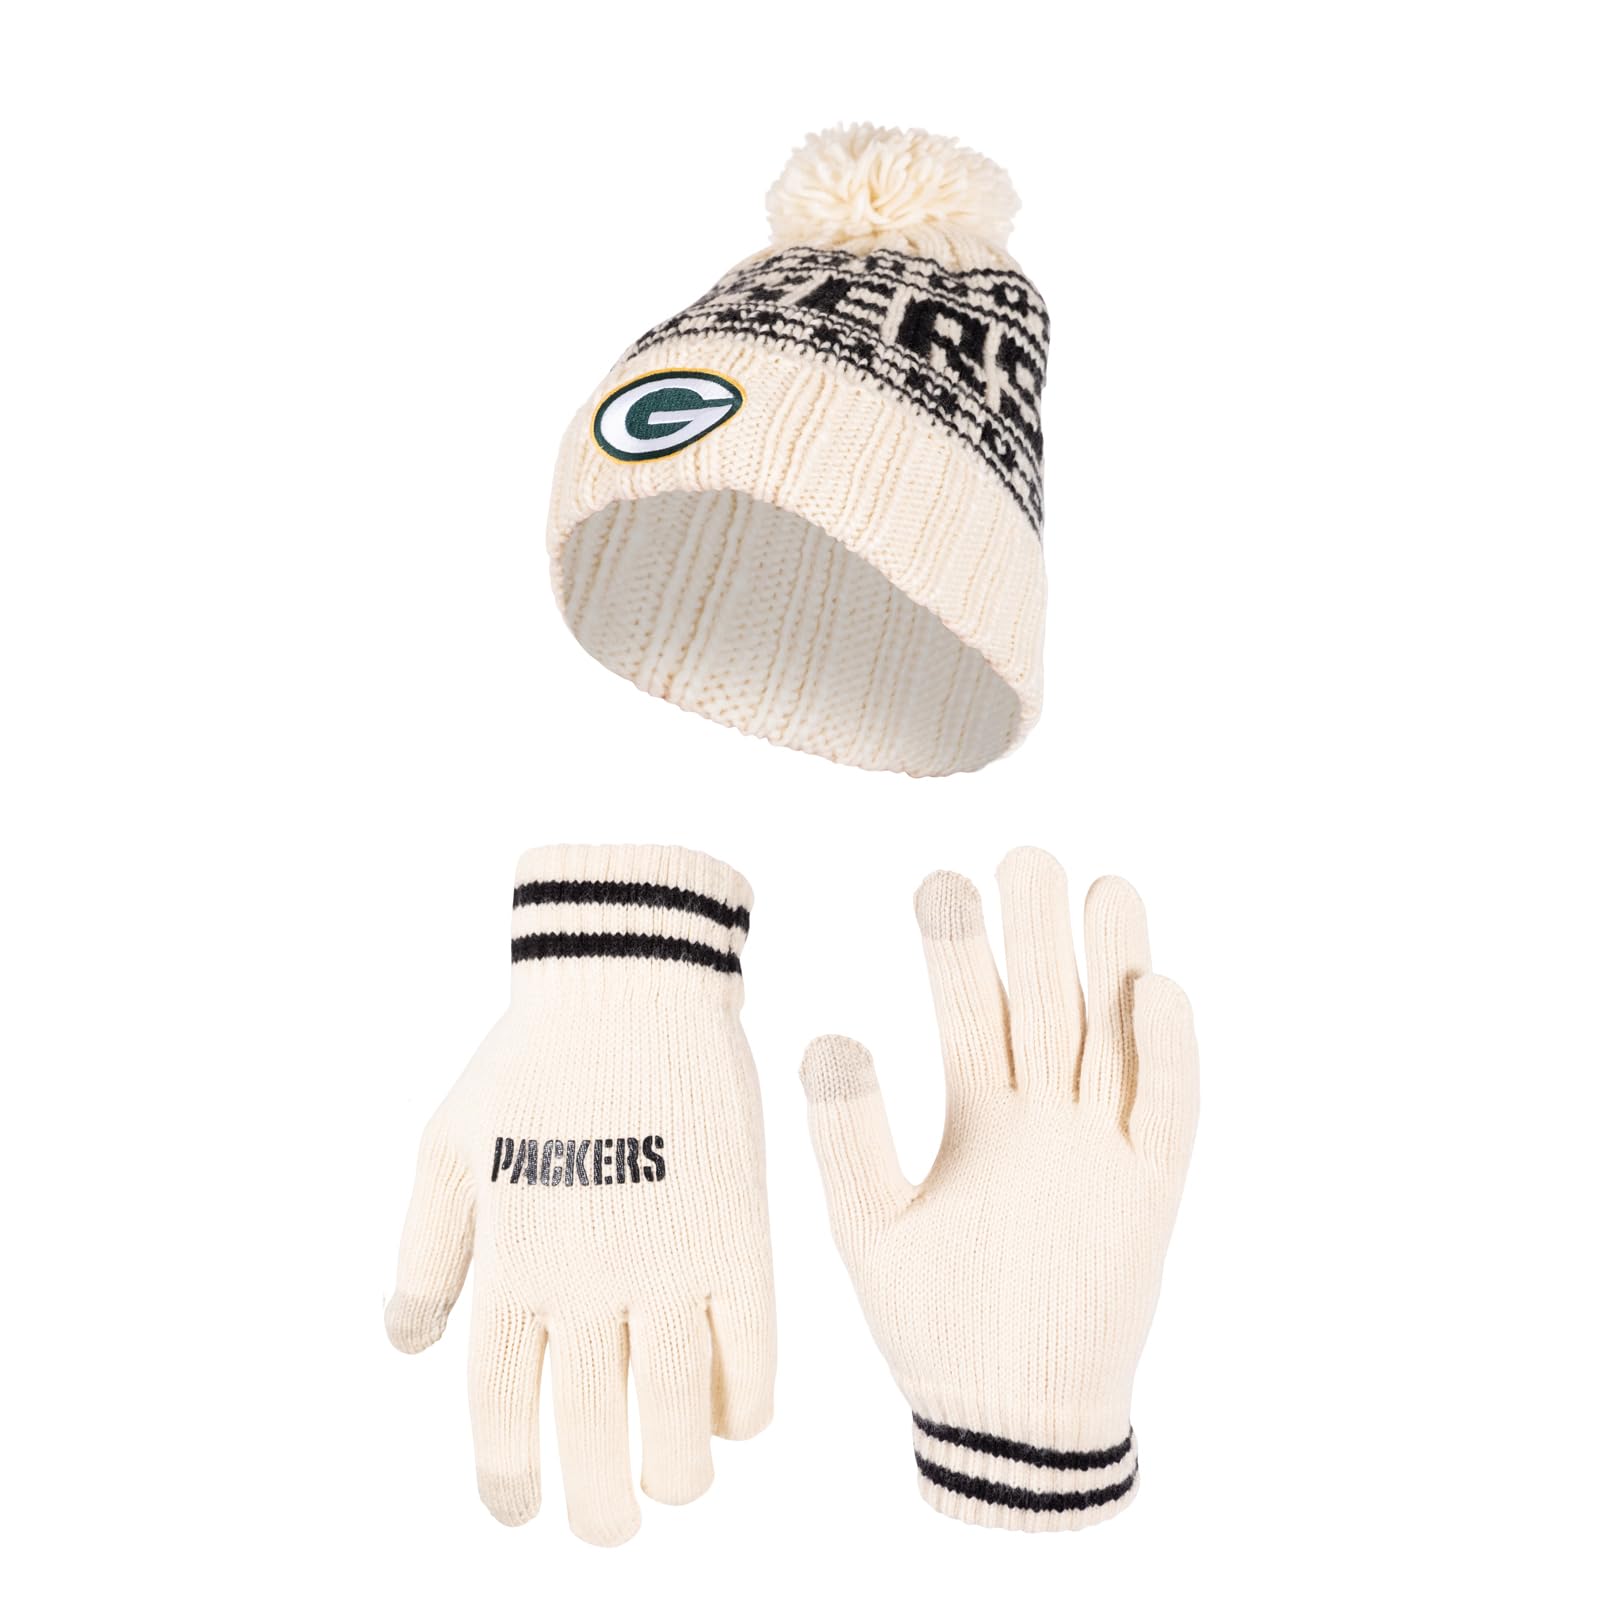 Ultra Game NFL Green Bay Packers Womens Super Soft Cable Knit Winter Beanie Knit Hat with Extra Warm Touch Screen Gloves|Green Bay Packers - UltraGameShop